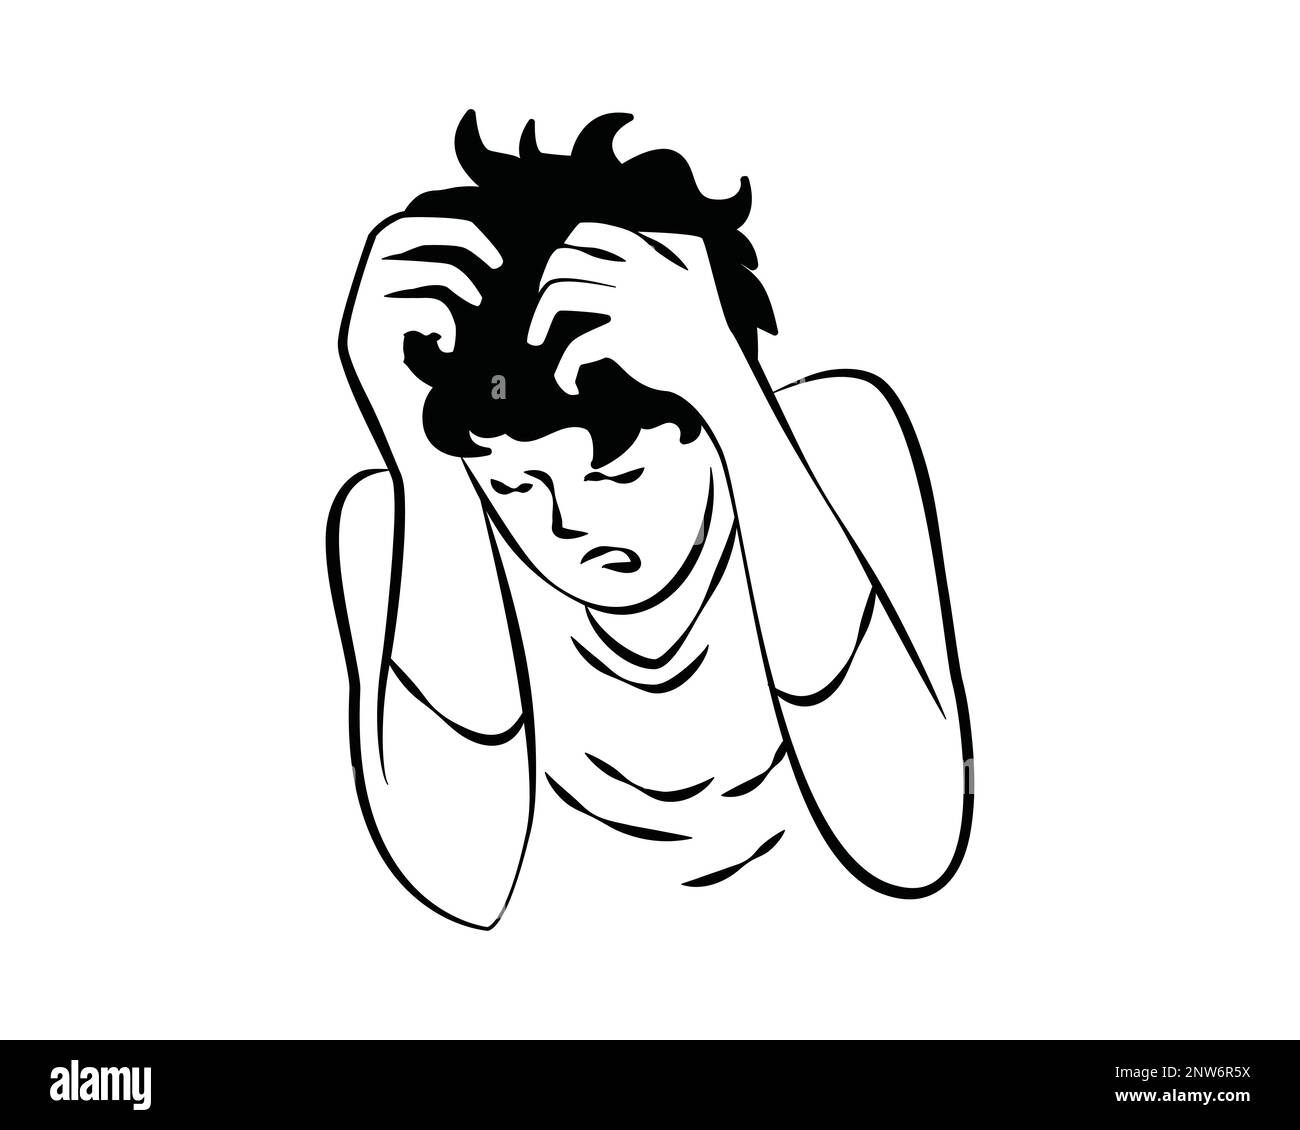 Man Having a Dizzy or Anxiety Moment Illustration with Silhouette Style Stock Vector